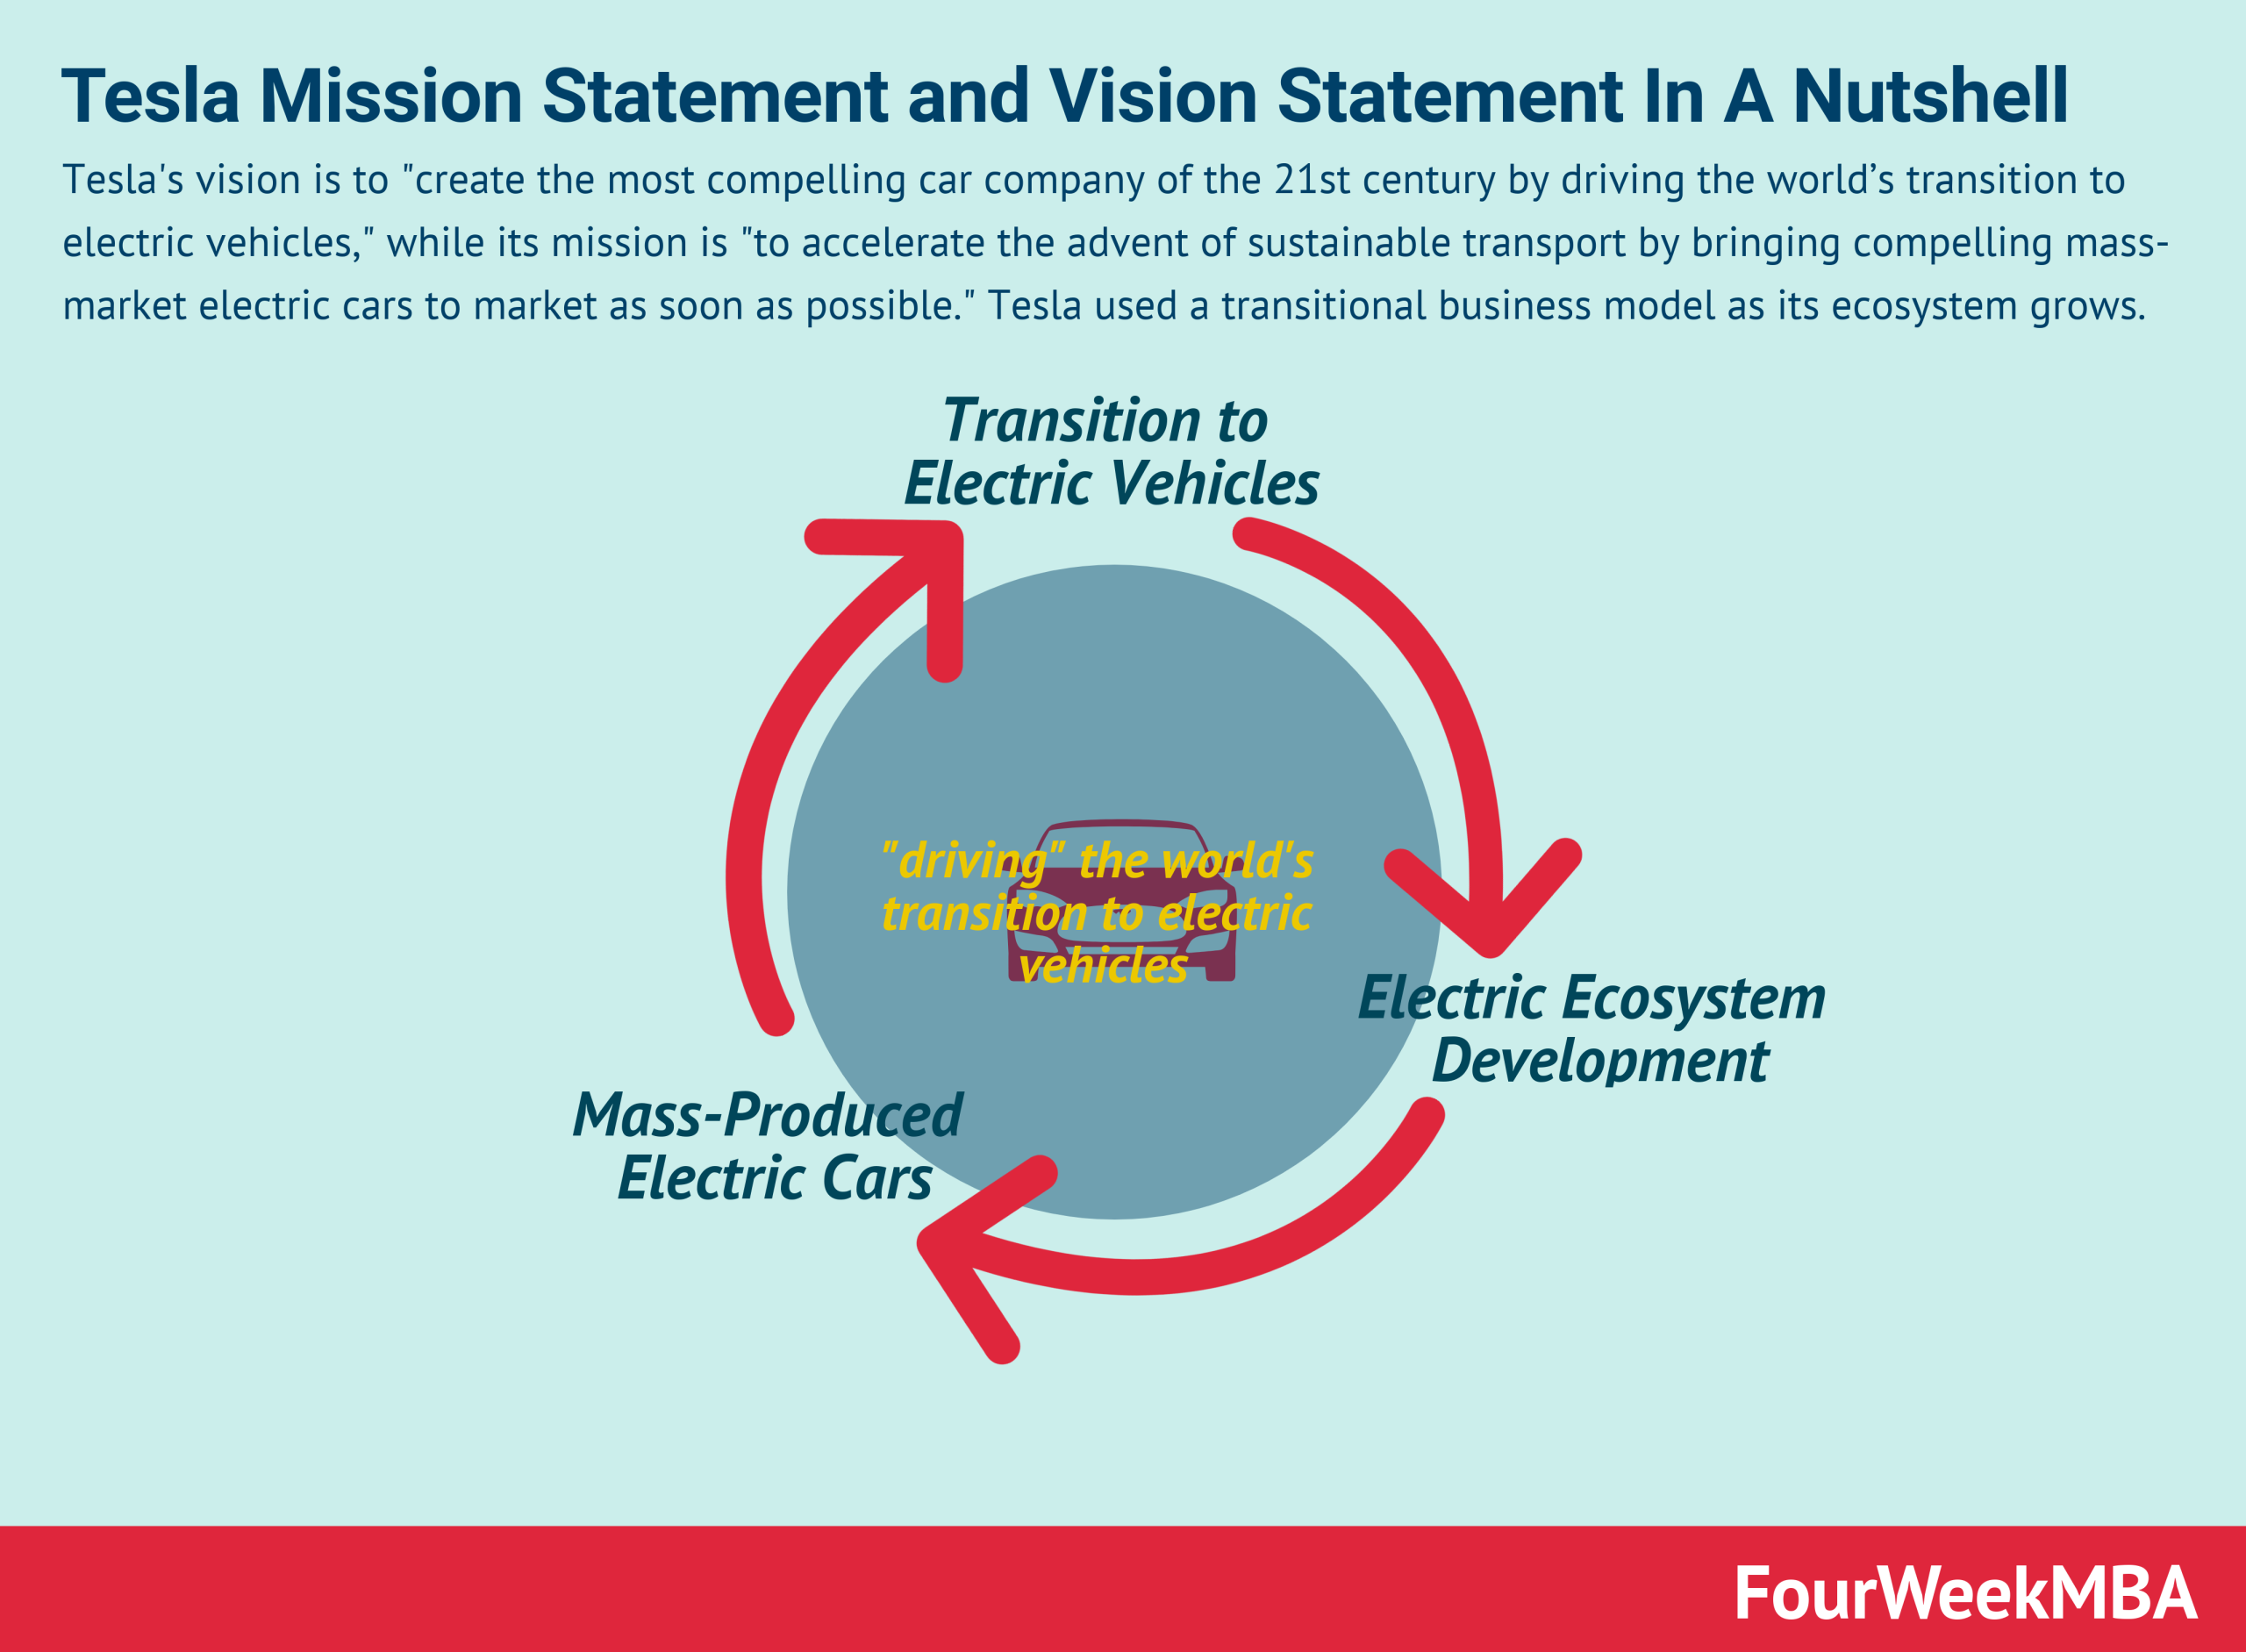 Tesla Mission Statement and Vision Statement In A Nutshell